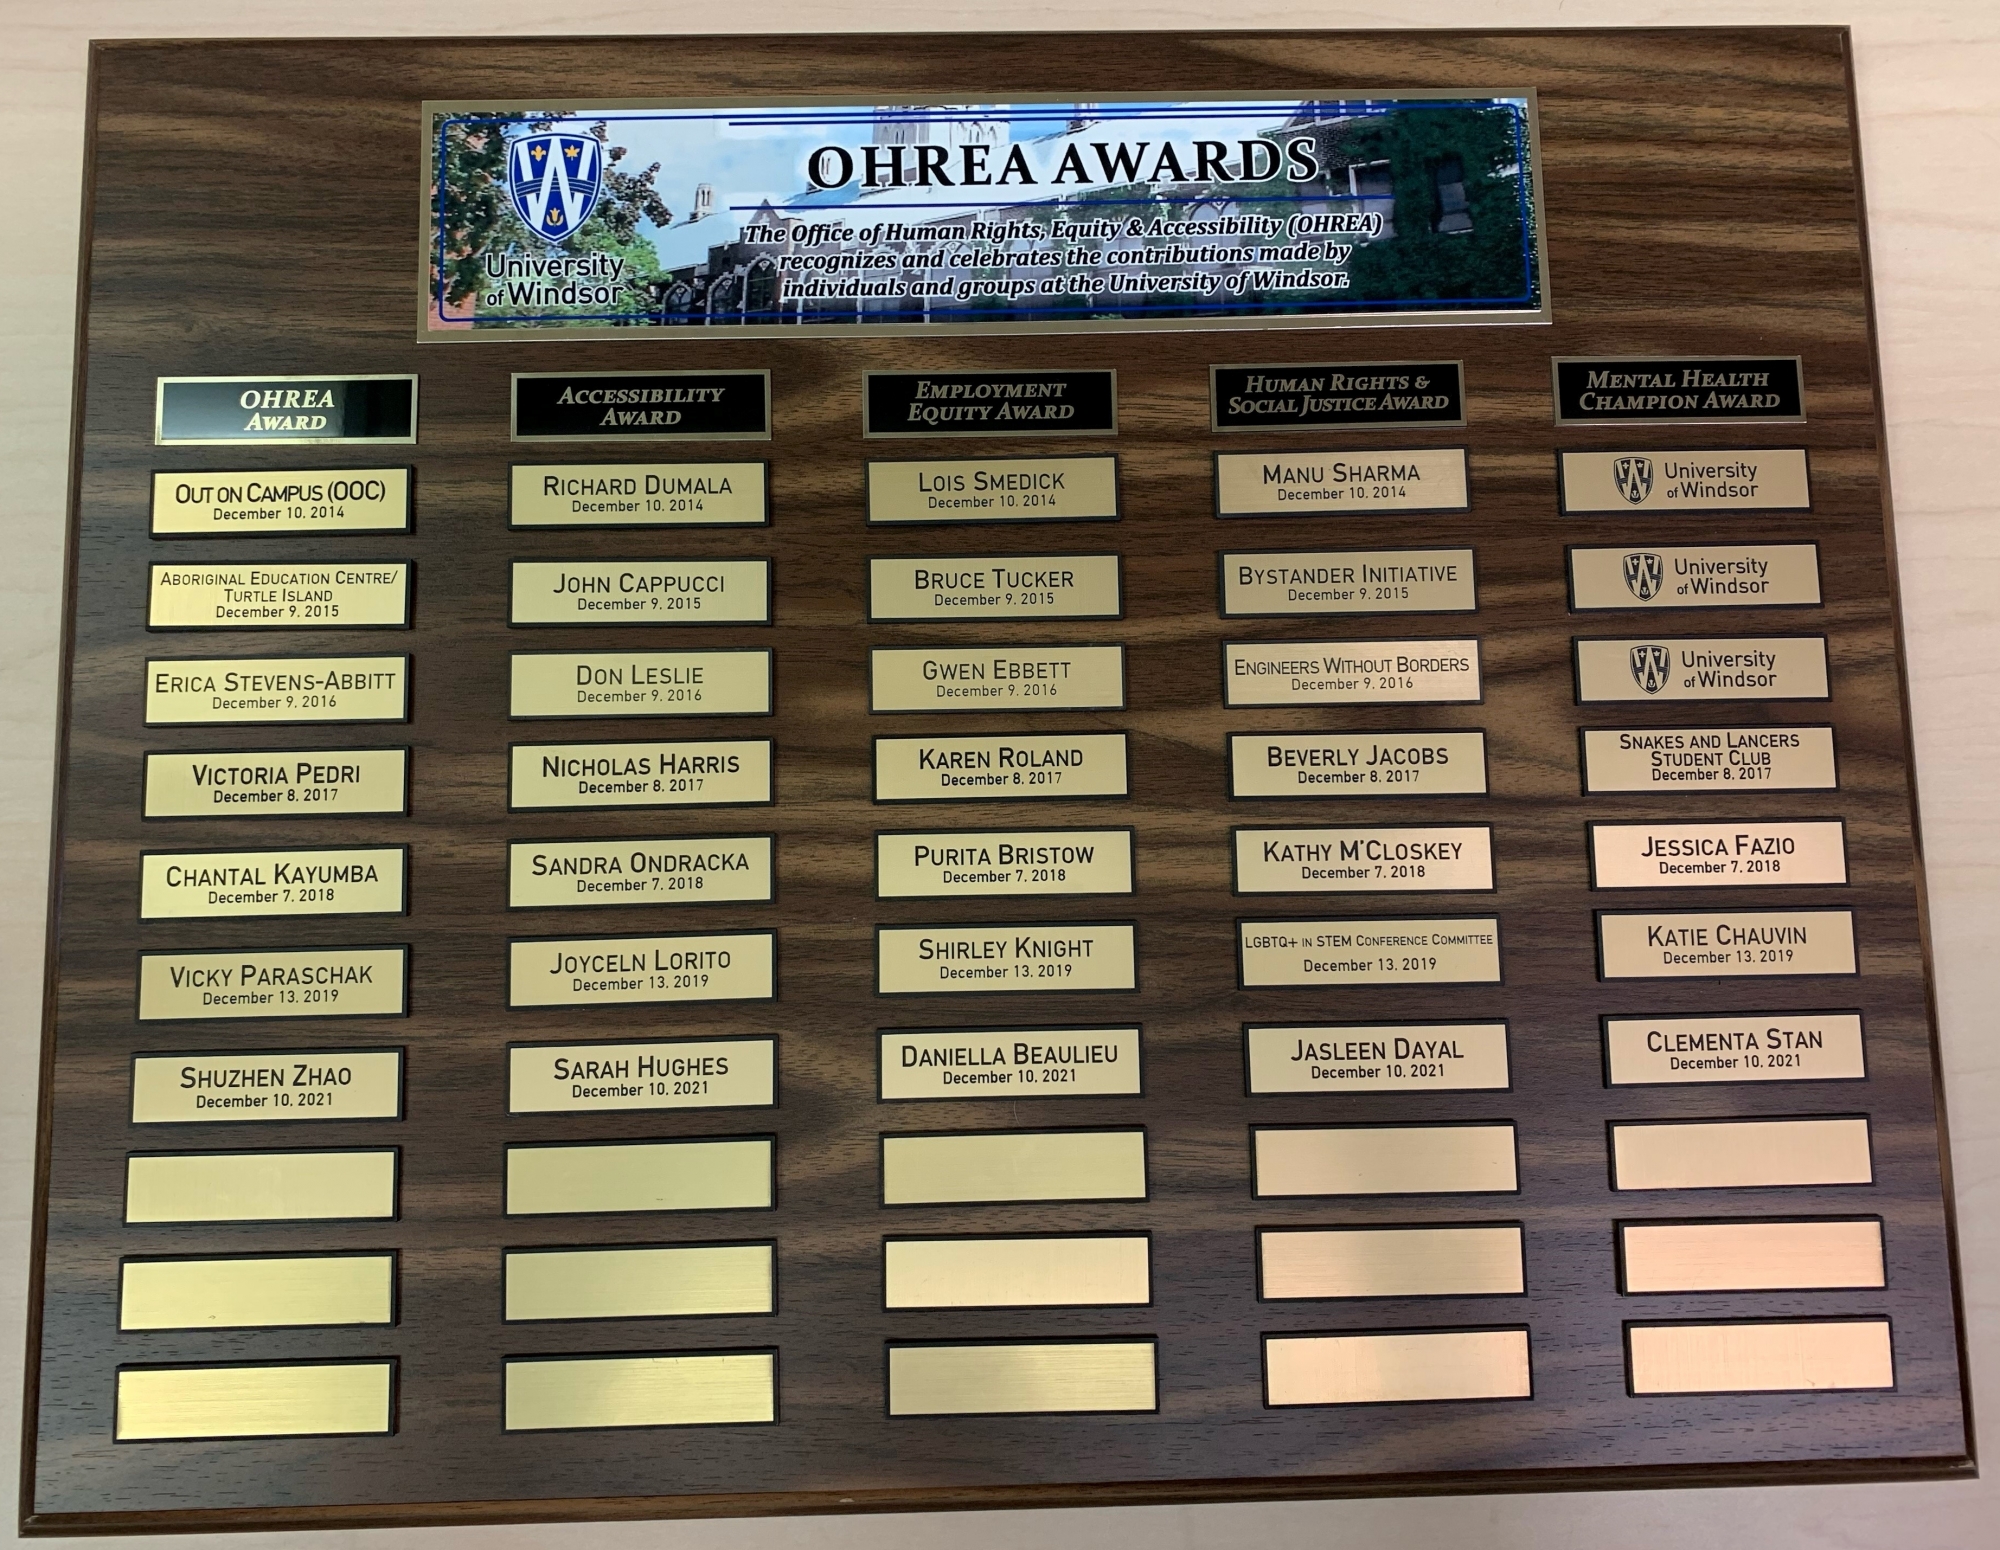 OHREA Awards plaque with previous winners names under each category